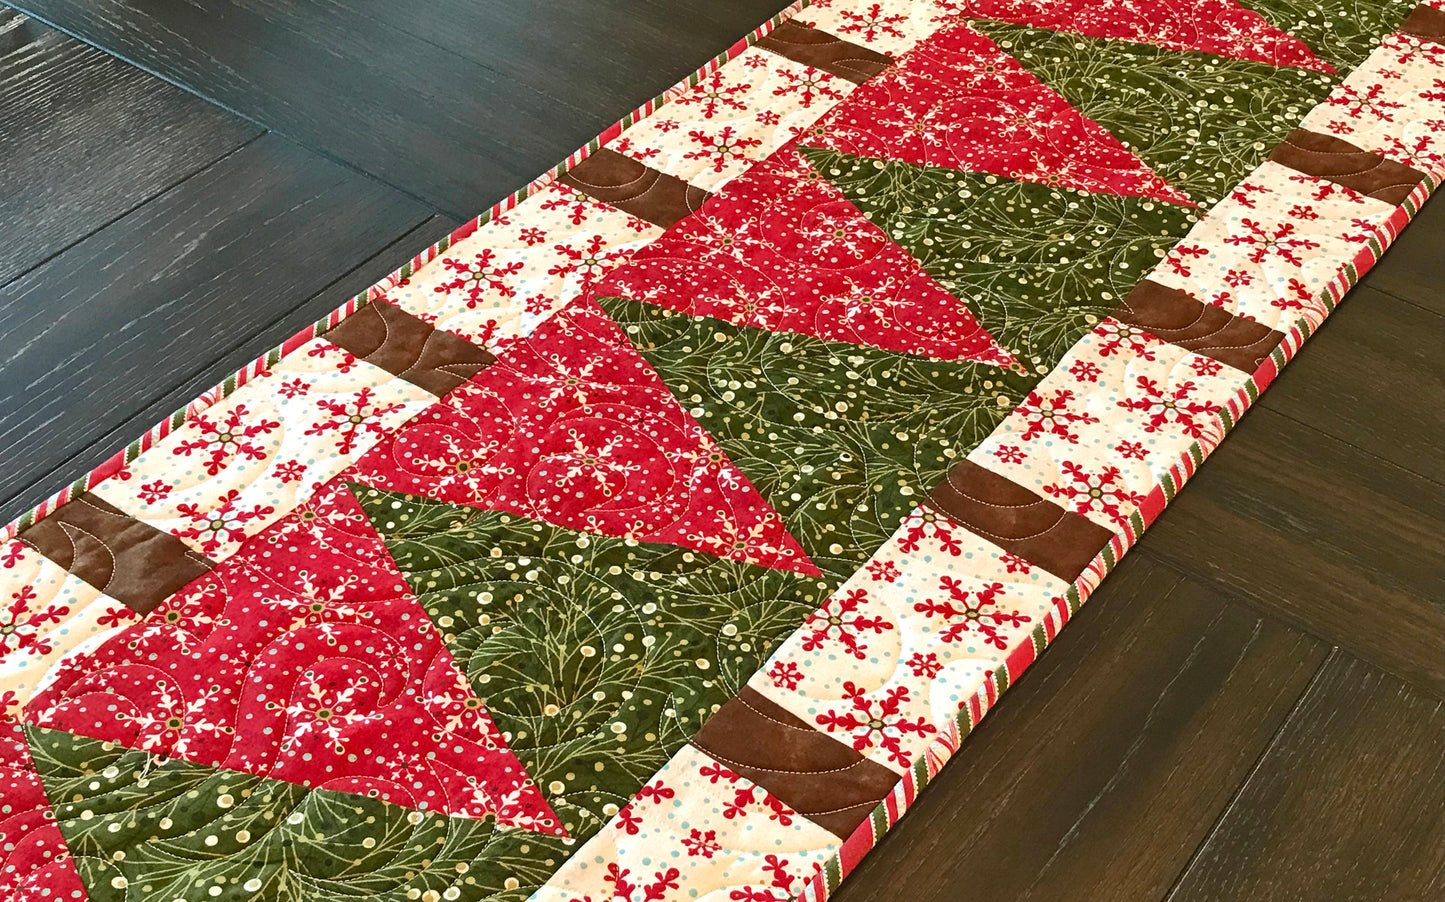 Christmas Tree Lane Table Runner Pattern - Digital Pattern - Handmade Quilts, Digital Patterns, and Home Décor items online - Cuddle Cat Quiltworks